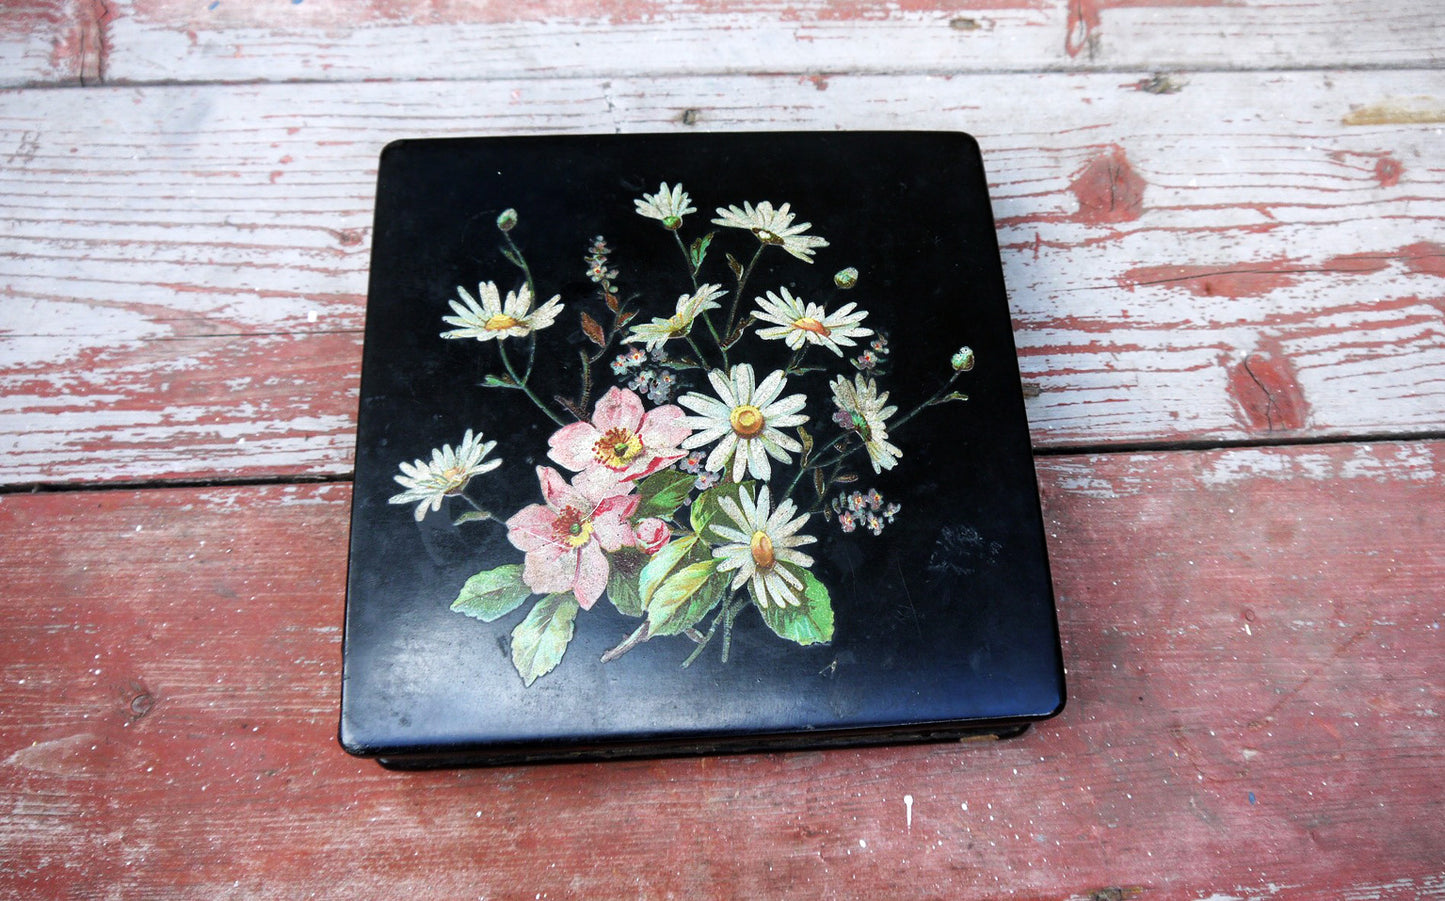 Vintage square floral wooden box in black and red wth traditional decoupaged flowers on the lid